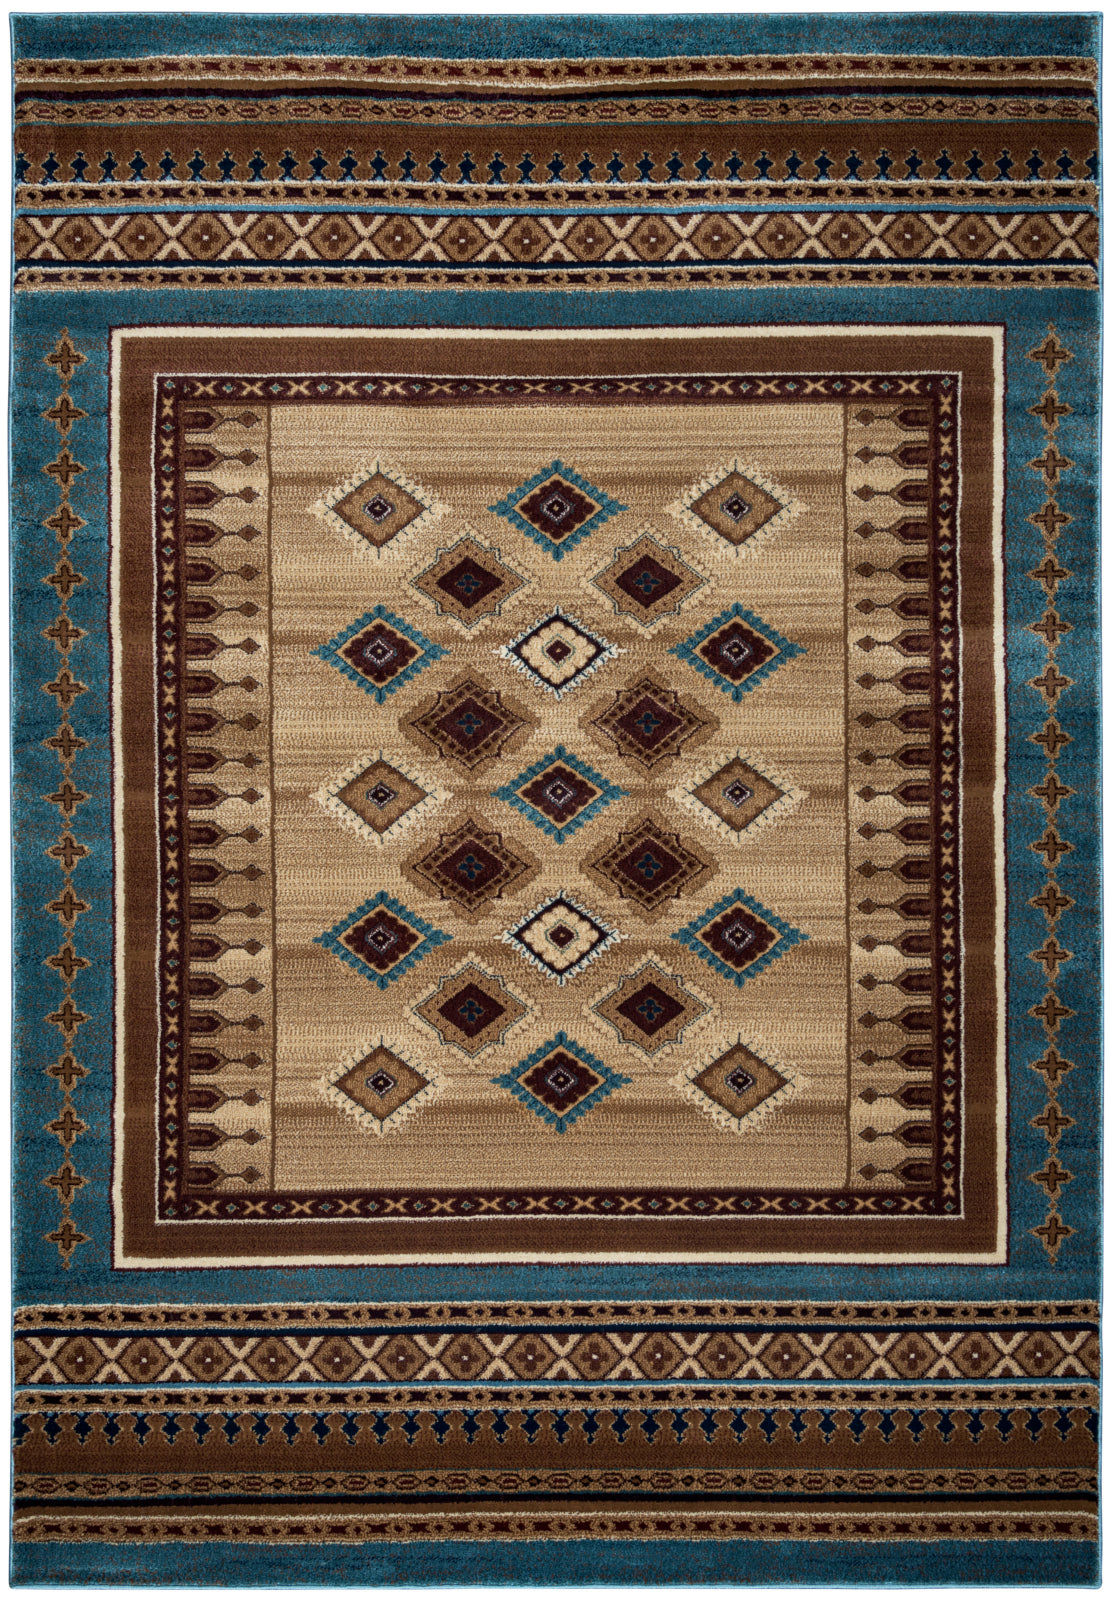 Rizzy Bellevue BV3712 Area Rug main image